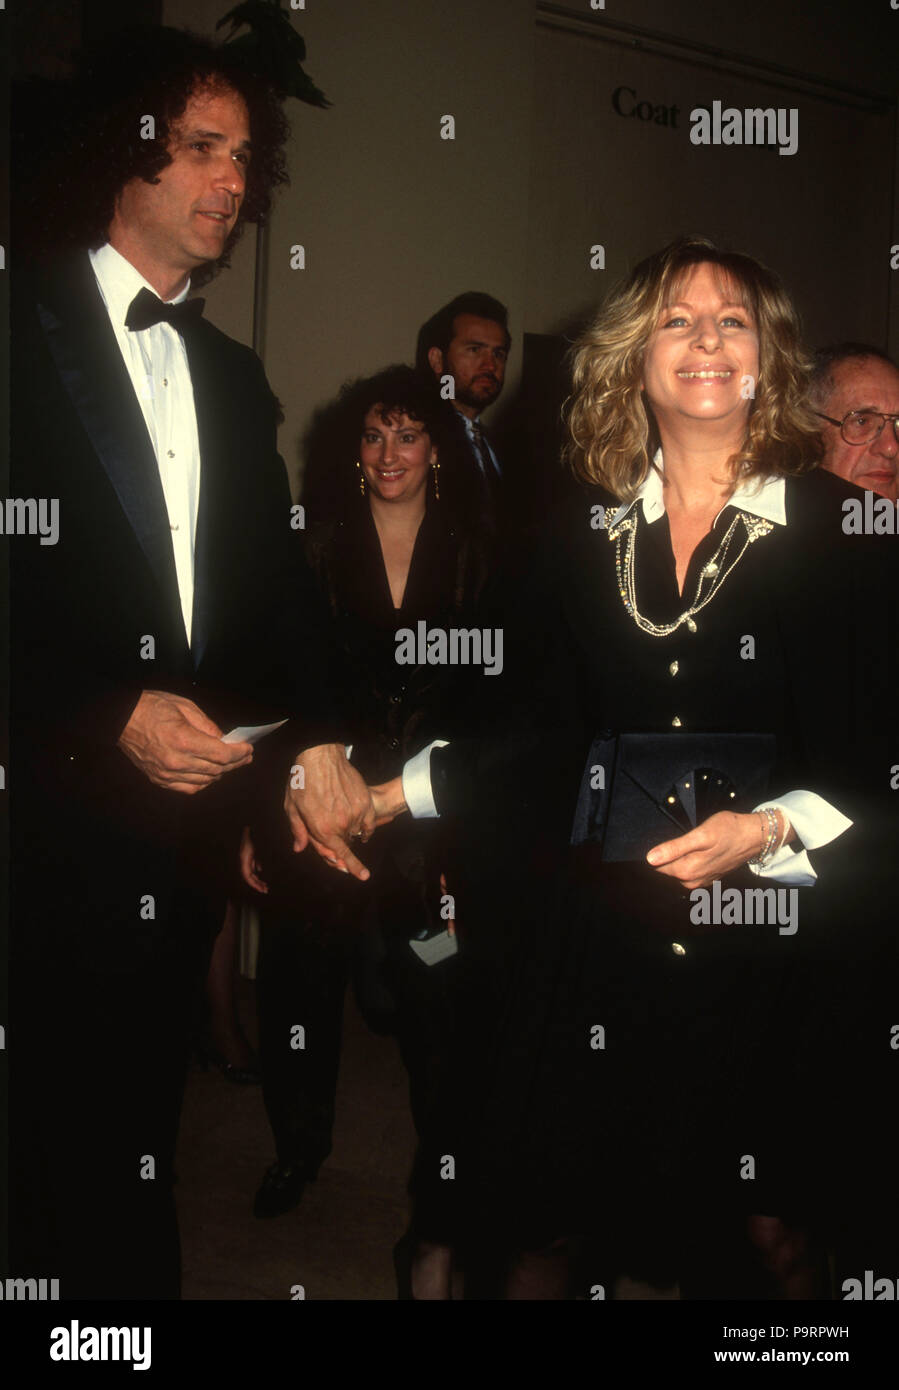 BEVERLY HILLS, CA - MARCH 22: (L-R) Composer Richard Baskin and Singer/actress Barbra Streisand attend the 44th Annual Writers Guild of America Awards on March 22, 1992 at the Beverly Hilton Hotel in Beverly Hills, California. Photo by Barry King/Alamy Stock Photo Stock Photo